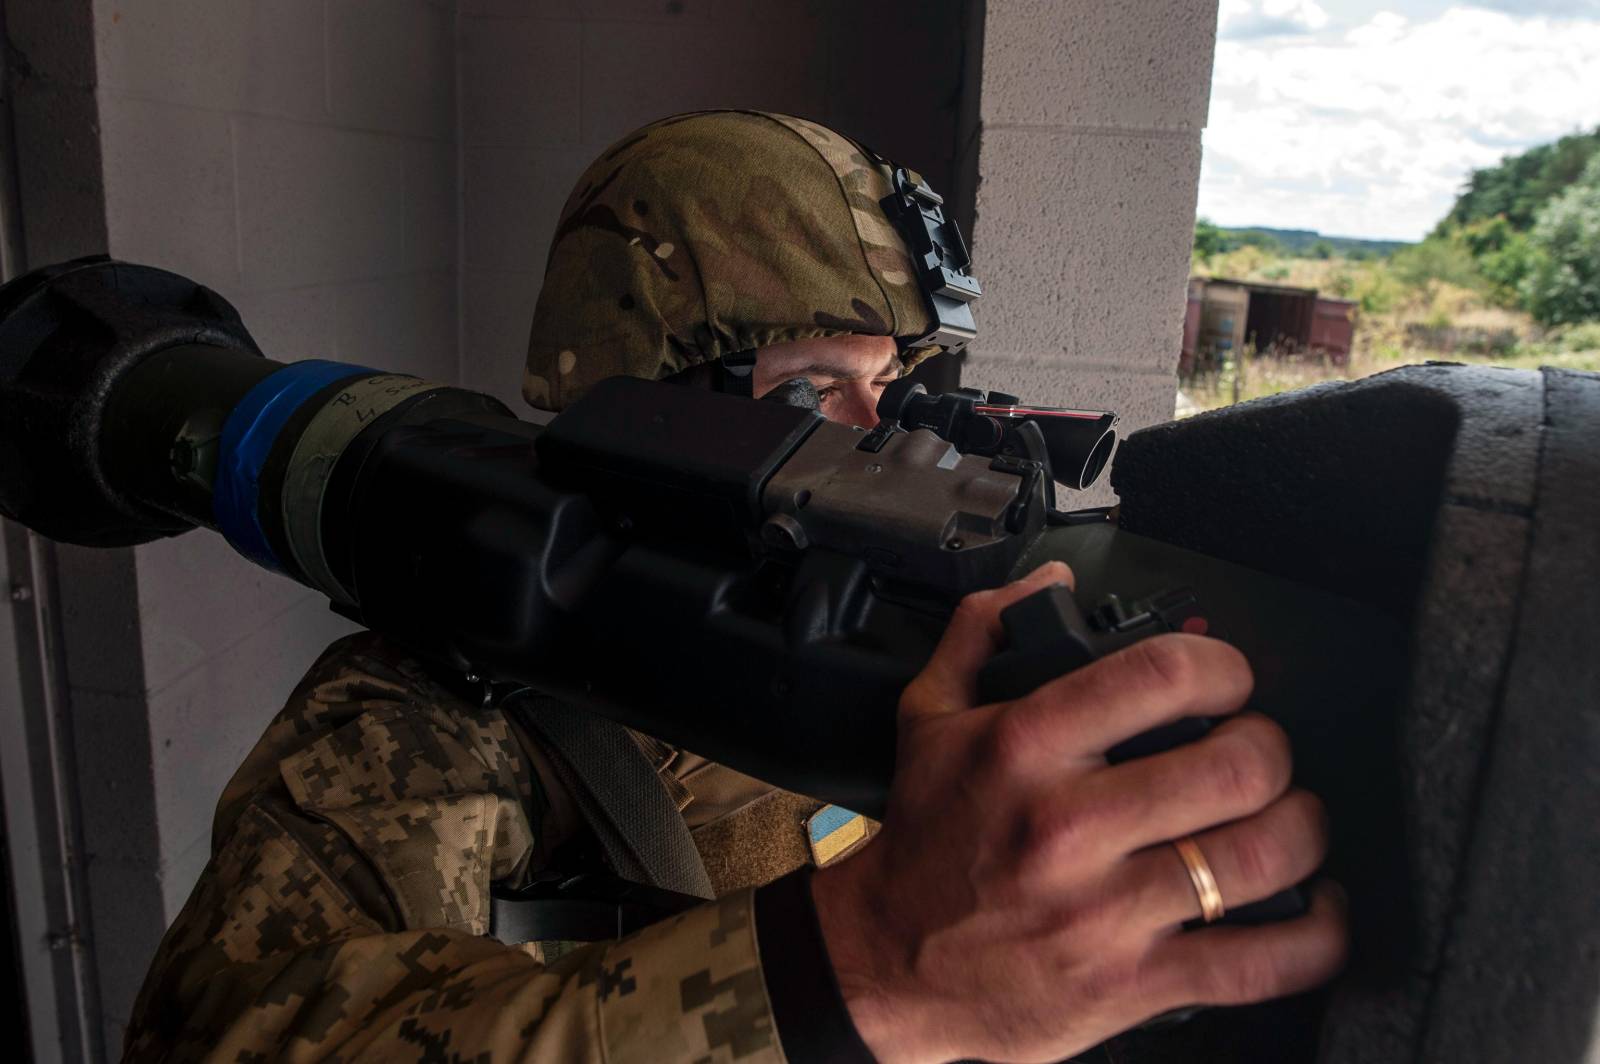 In the United Kingdom, 20,000 Ukrainian recruits have been high-quality trained.